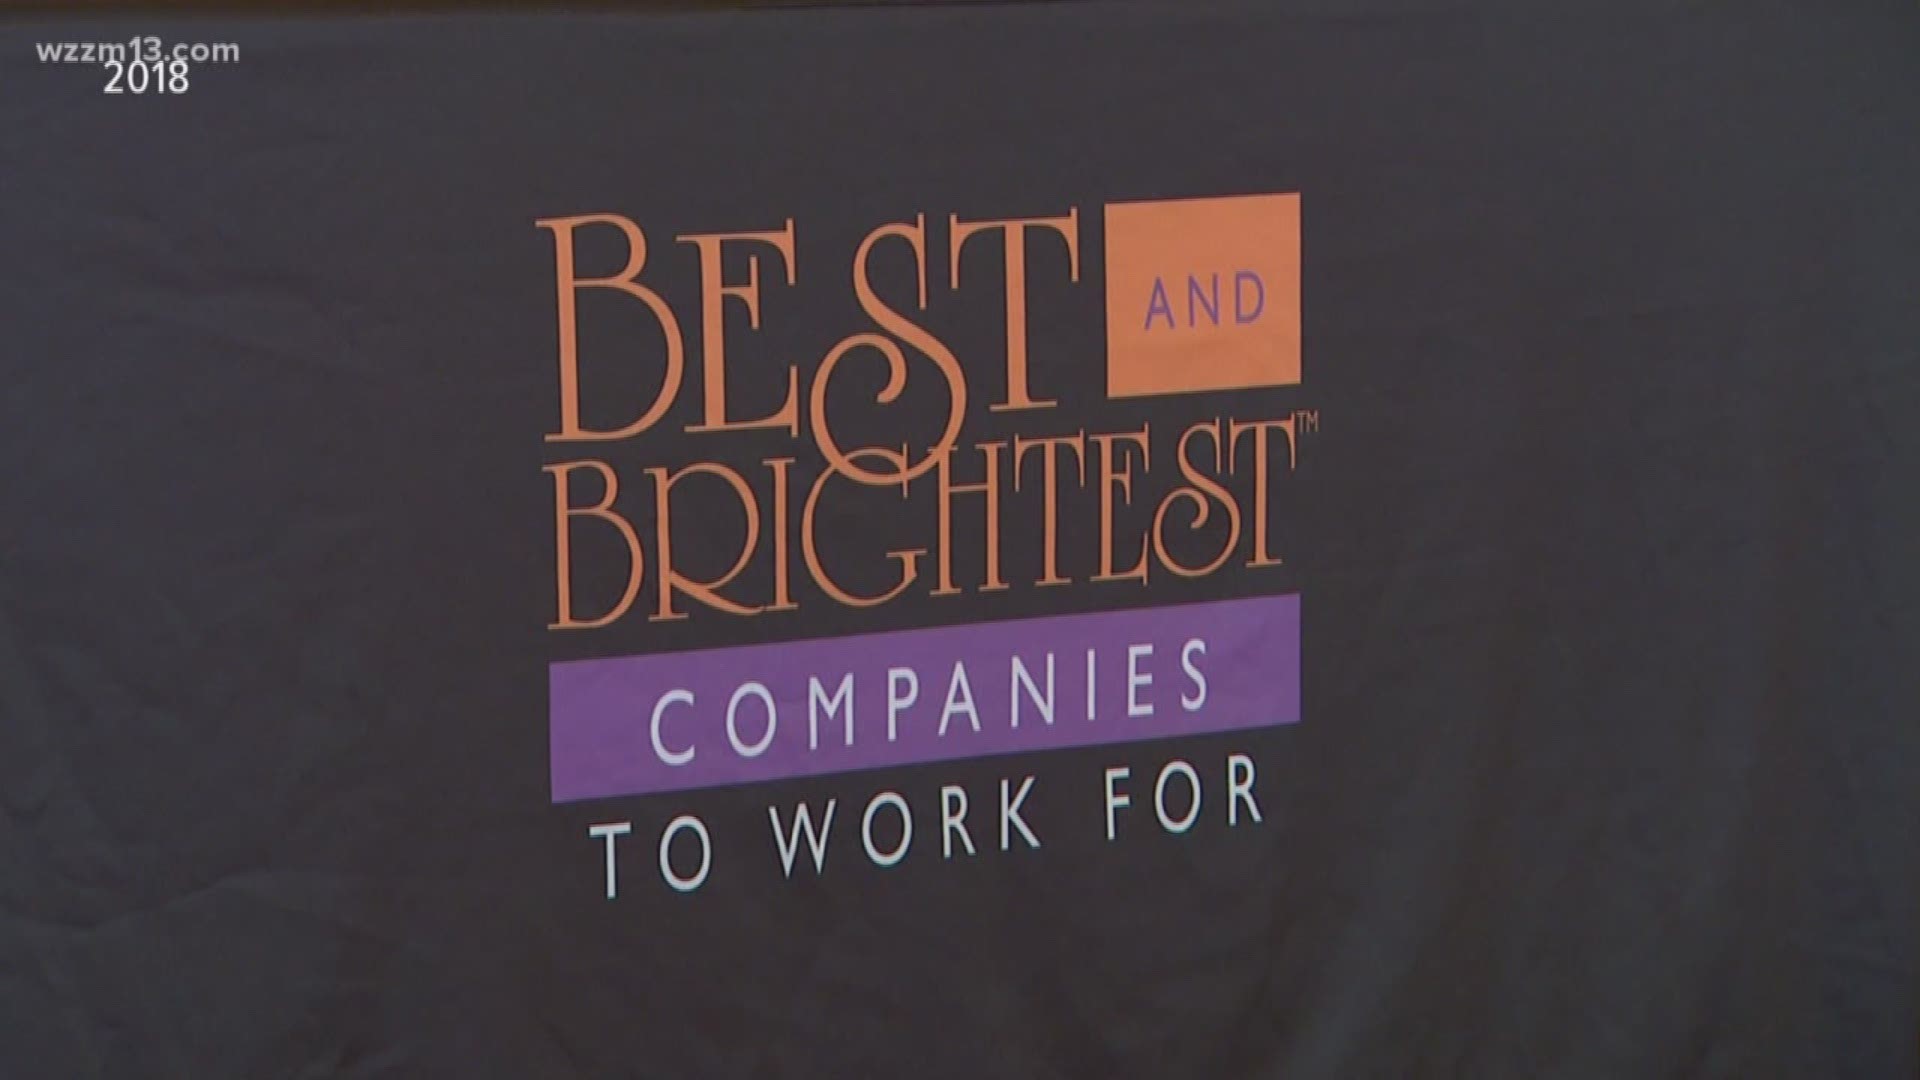 This year's best and brightest companies to work for will be honored at the JW Marriott in downtown Grand Rapids on May 7.